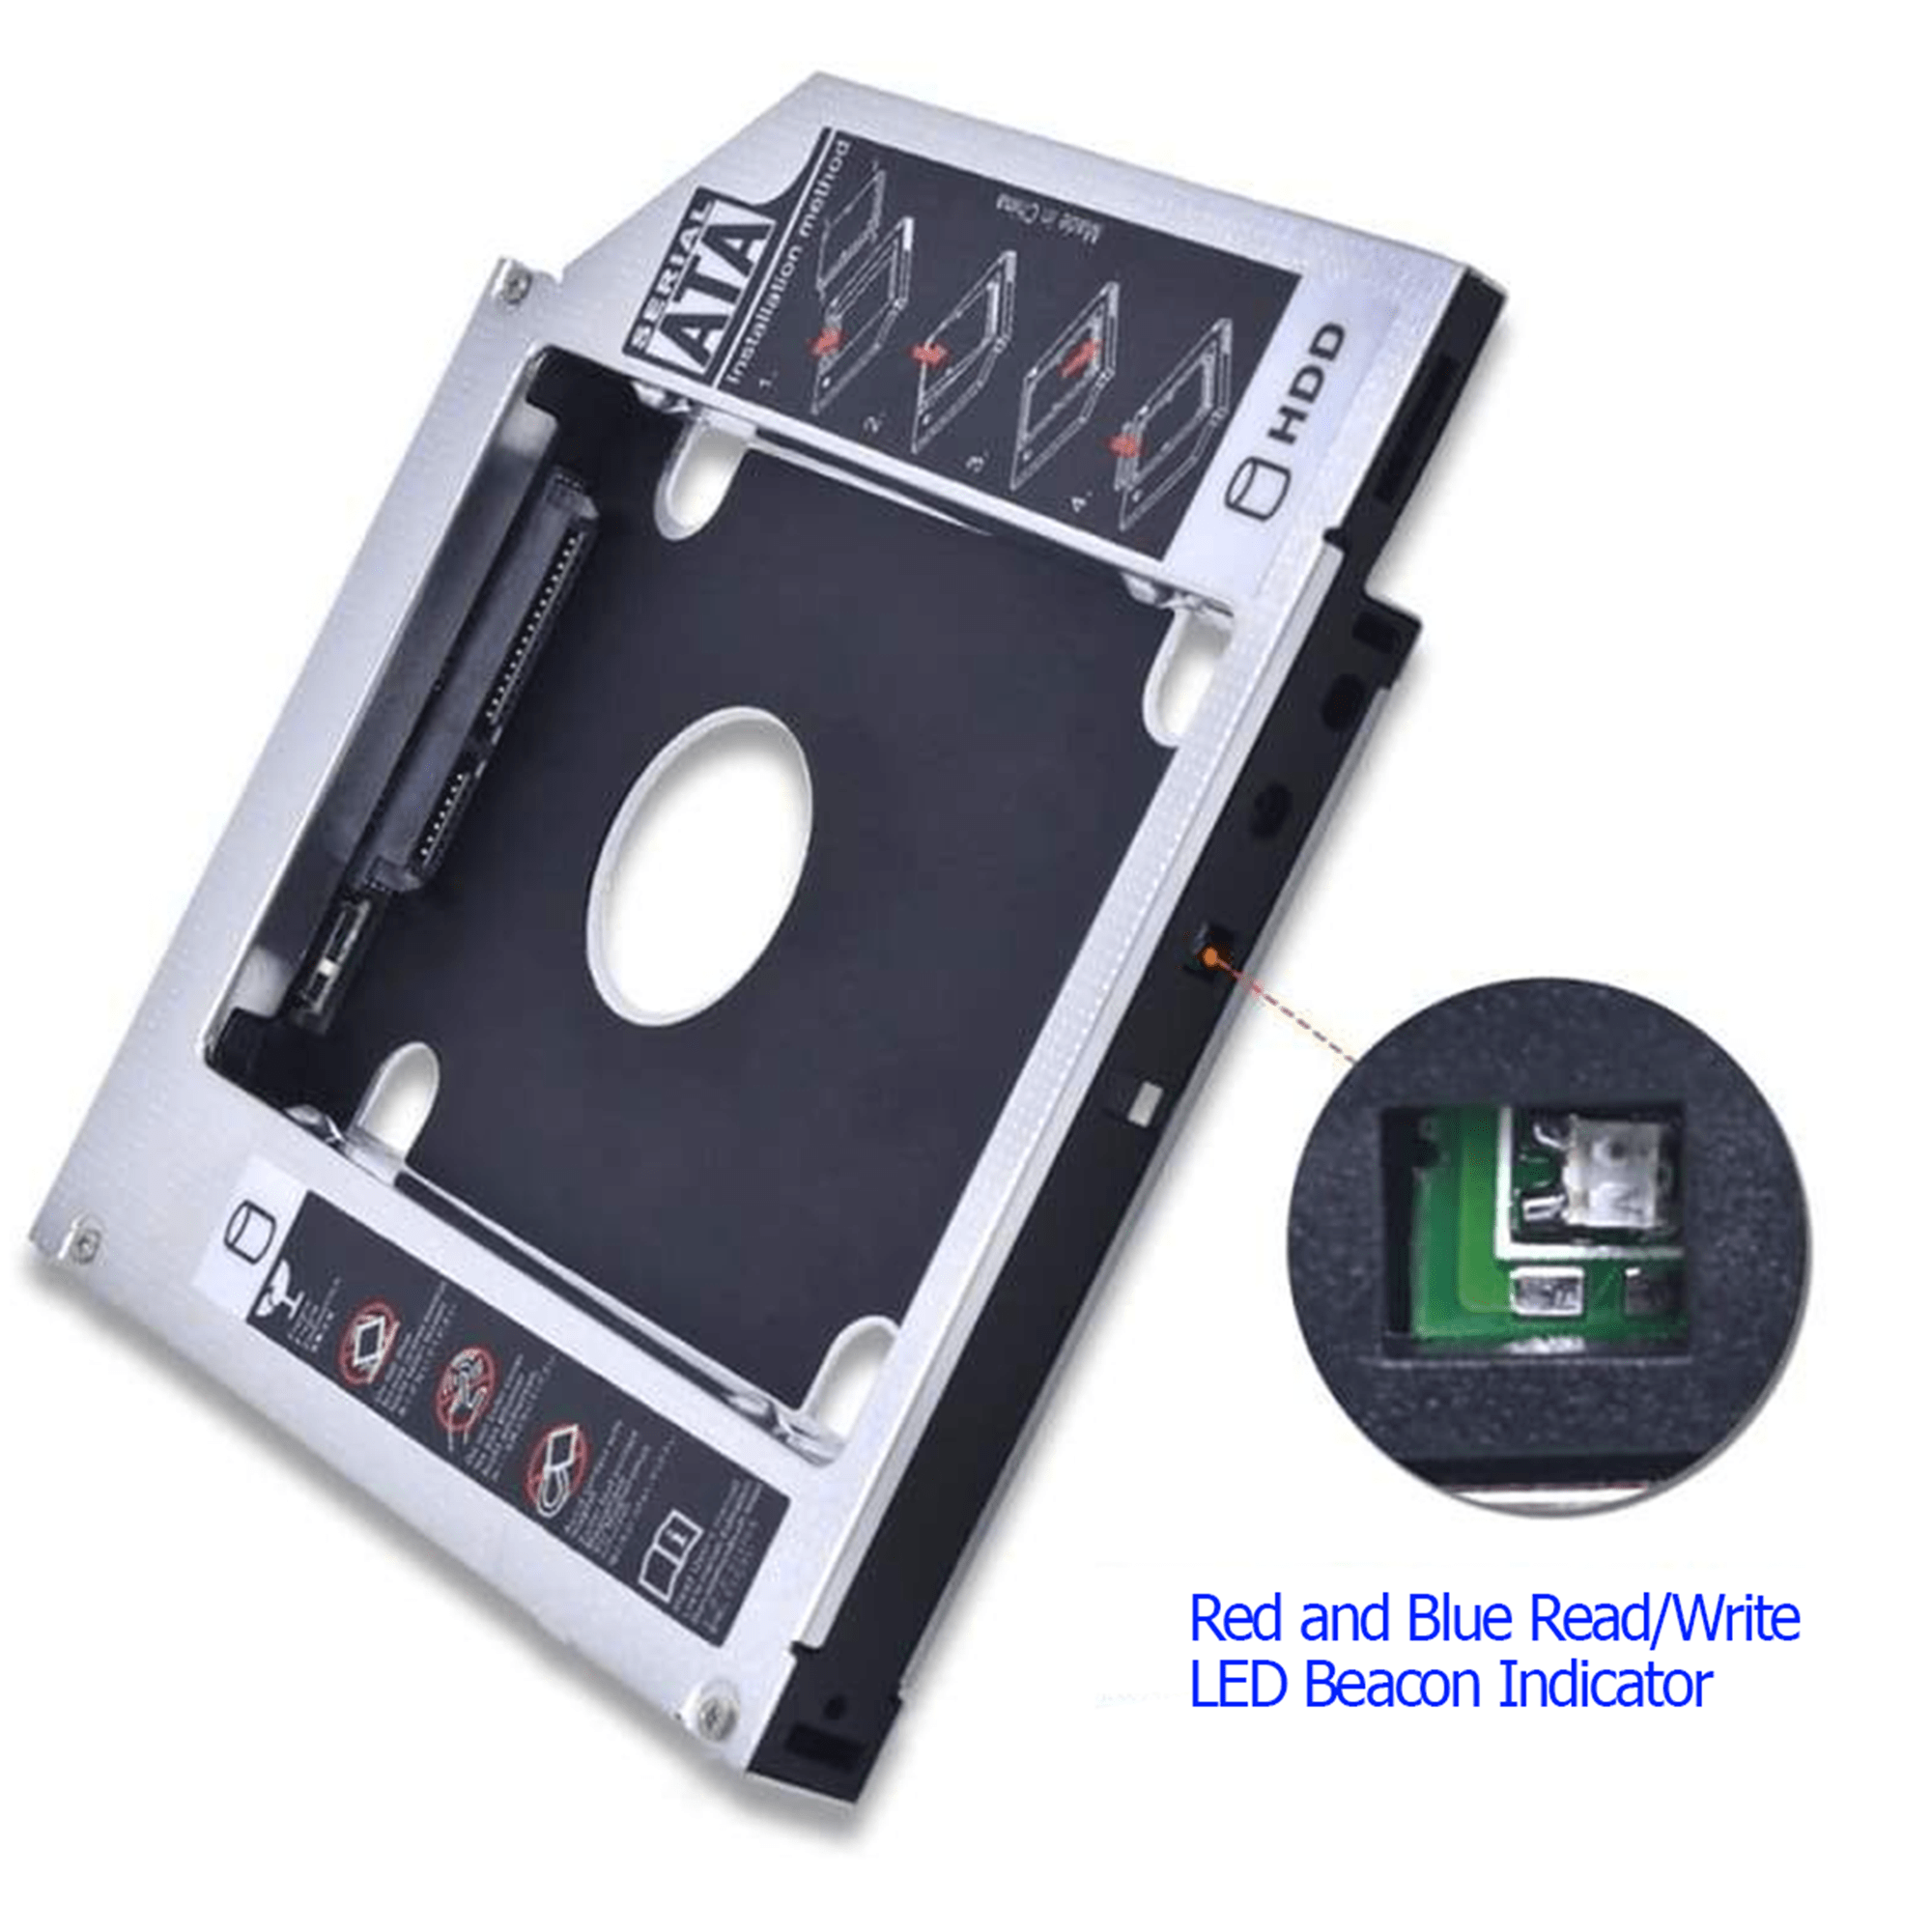 Caddy Adapter 2.5" HDD | SSD to 12.7mm Optical | DVD RW Bay.